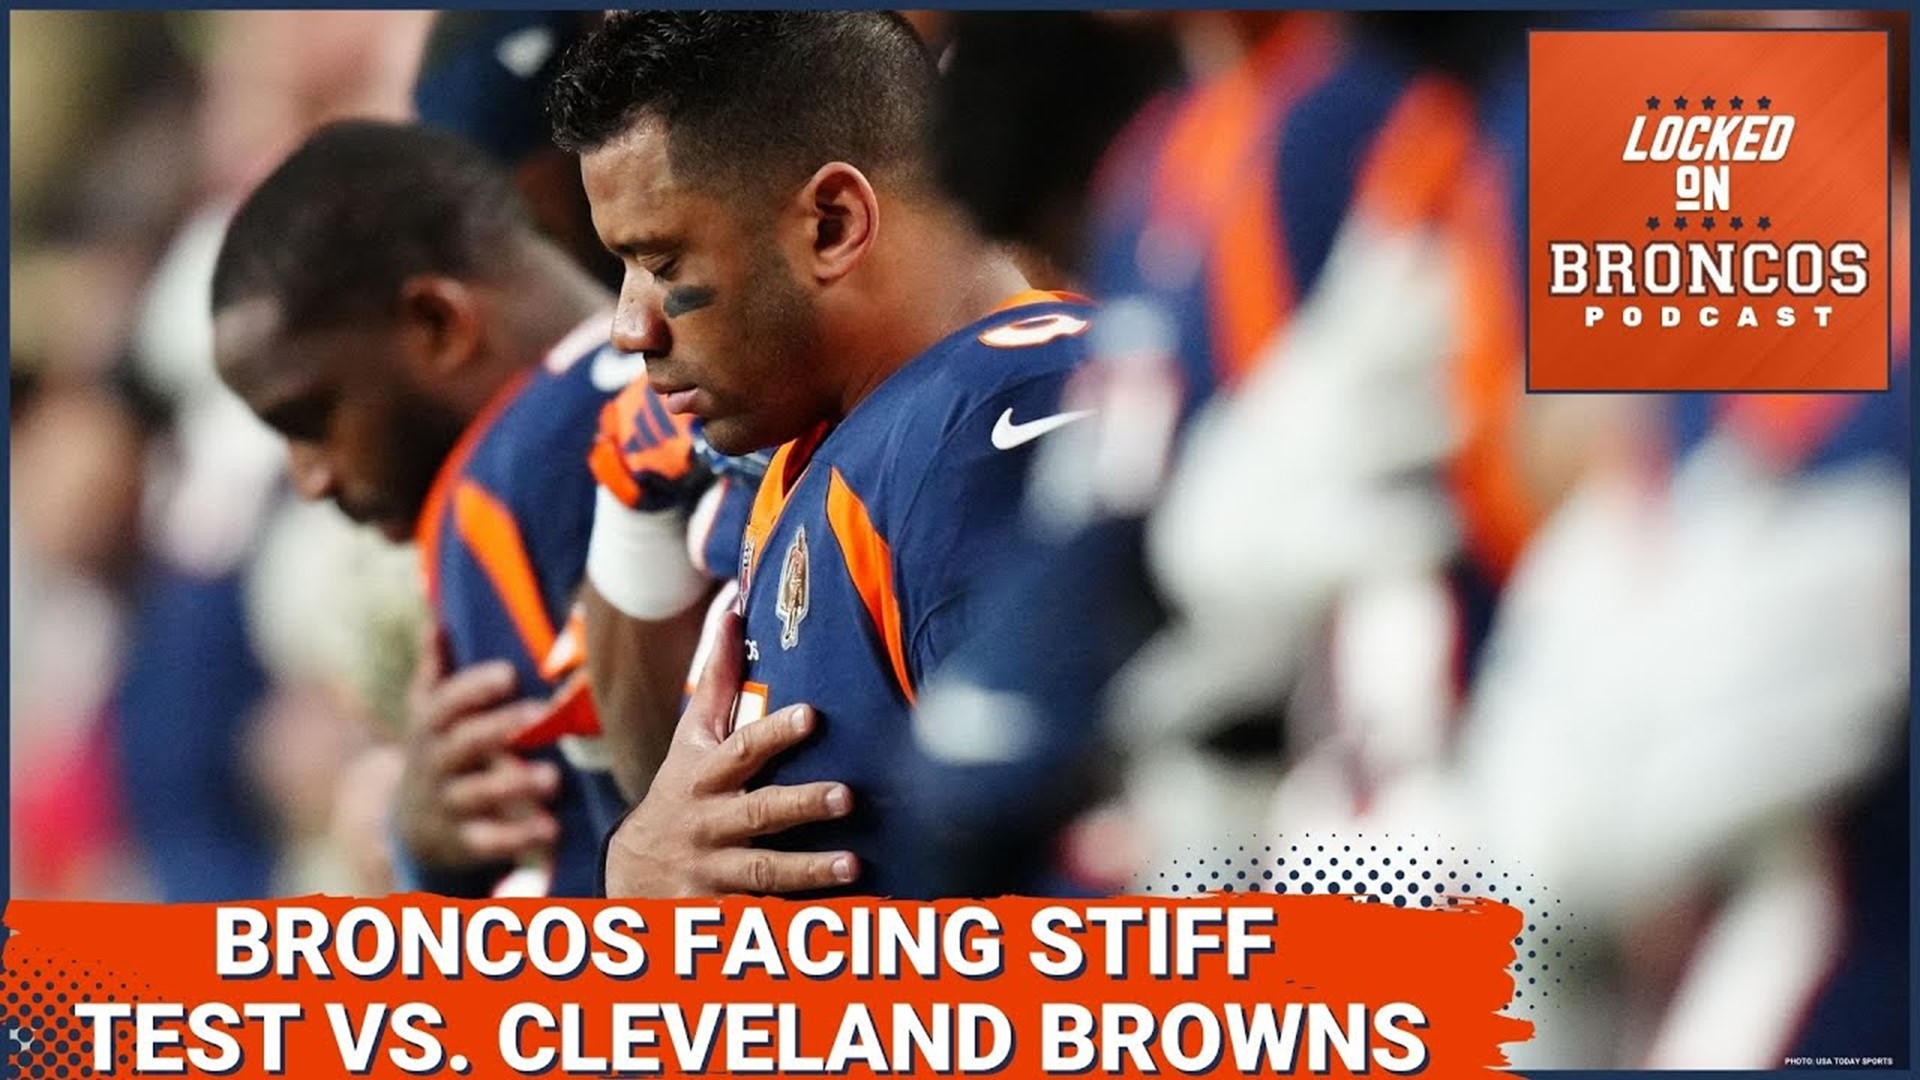 Can the Denver Broncos find a way to play their best football this Sunday against the Cleveland Browns?